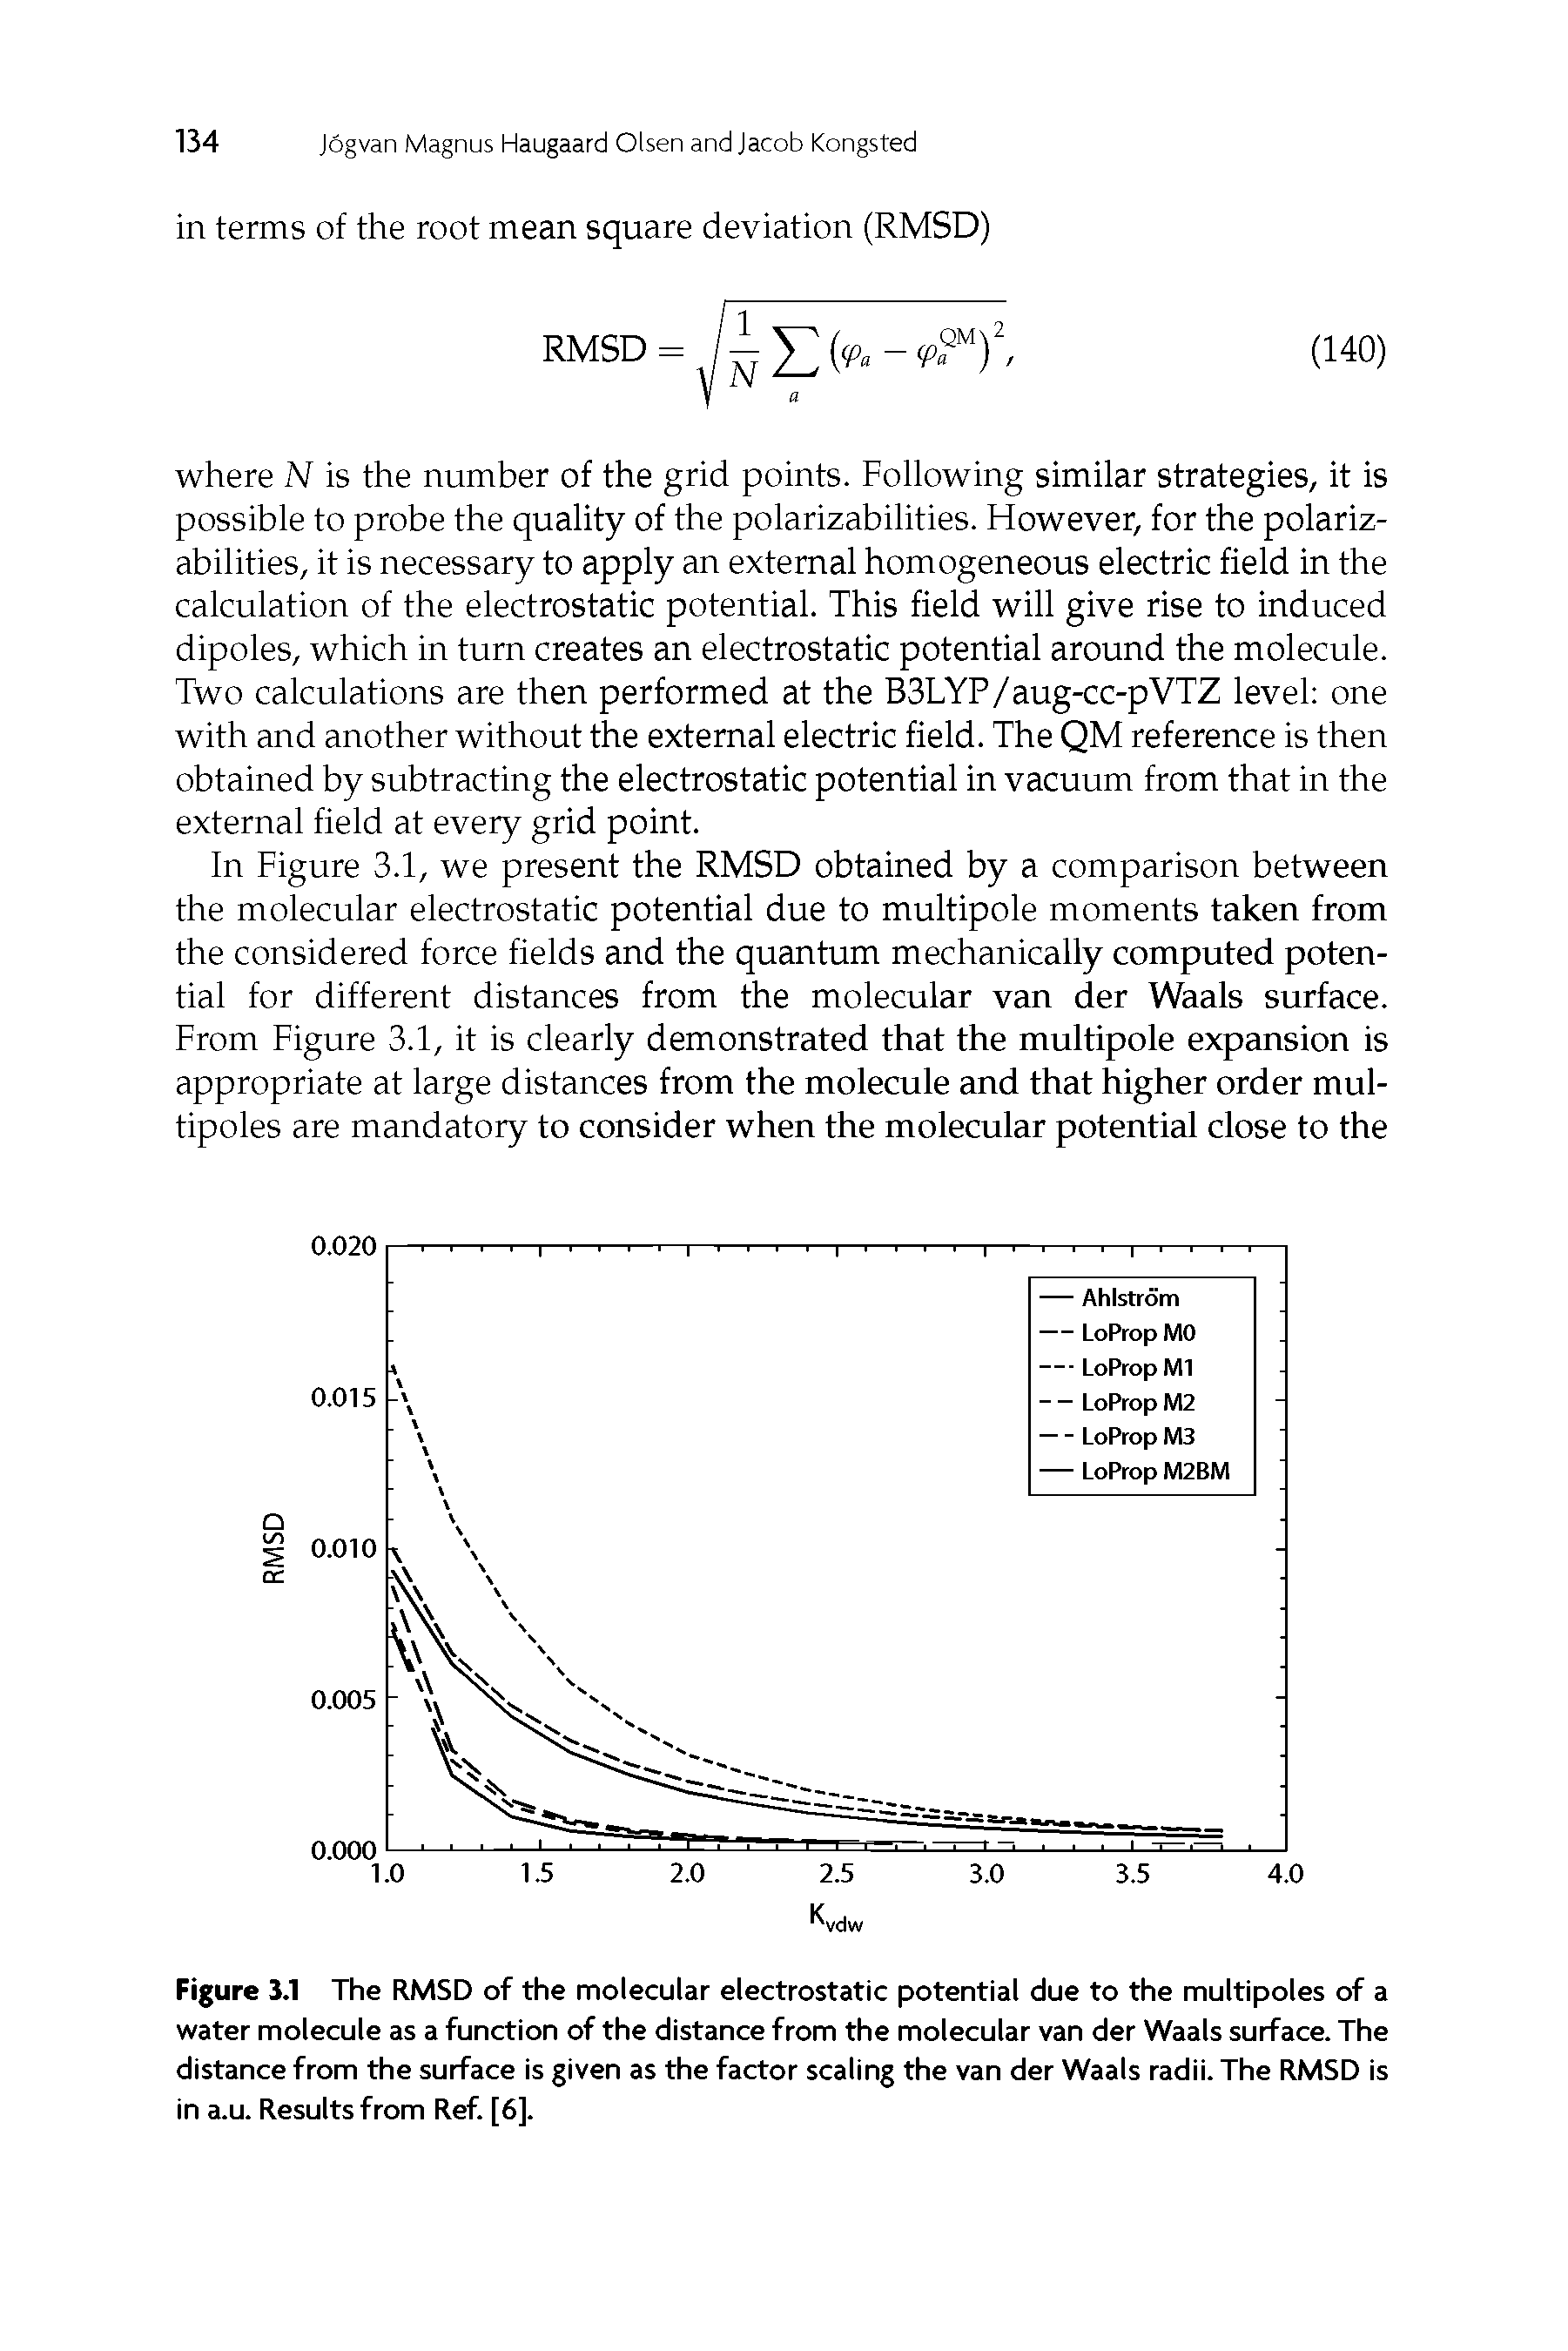 Figure 3.1 The RMSD of the molecular electrostatic potential due to the multipoles of a water molecule as a function of the distance from the molecular van der Waals surface. The distance from the surface is given as the factor scaling the van der Waals radii. The RMSD is in a.u. Results from Ref. [6].